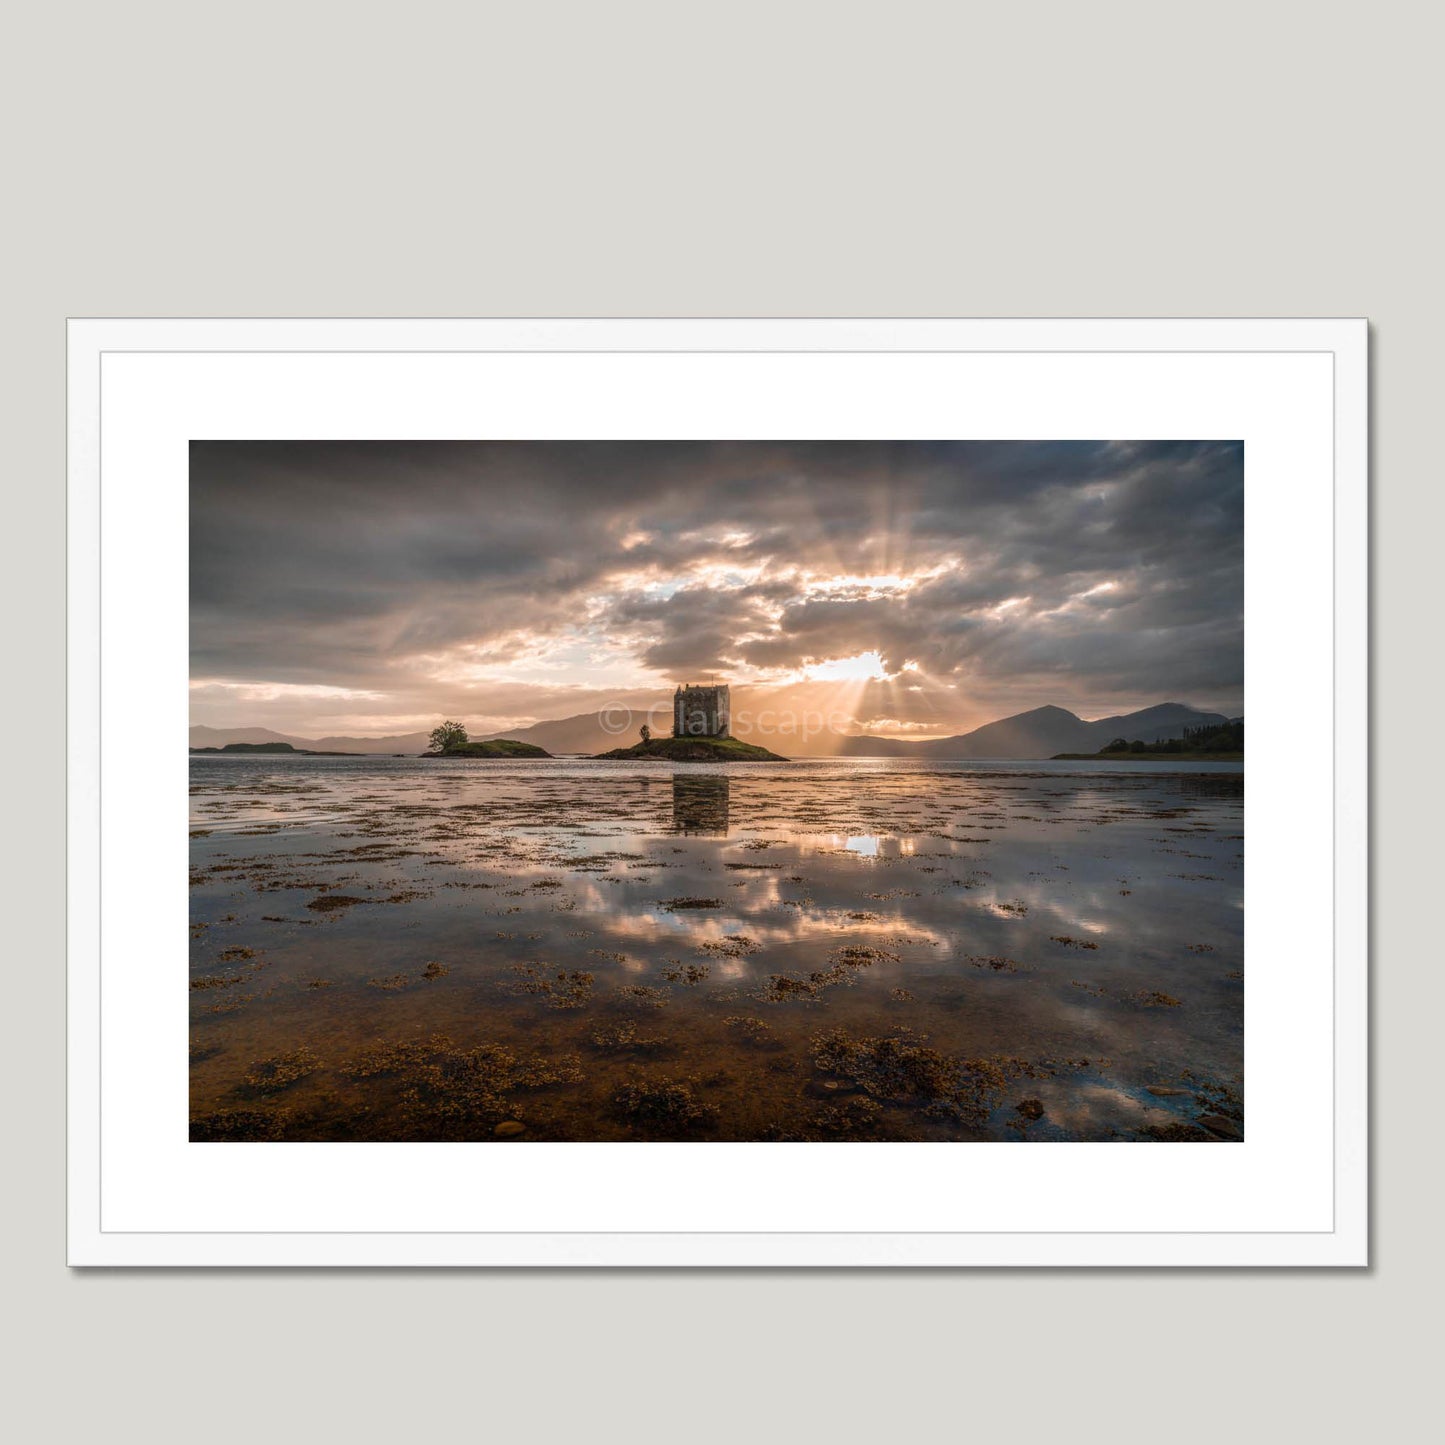 Clan Stewart of Appin - Castle Stalker - Framed & Mounted Photo Print 28"x20" White